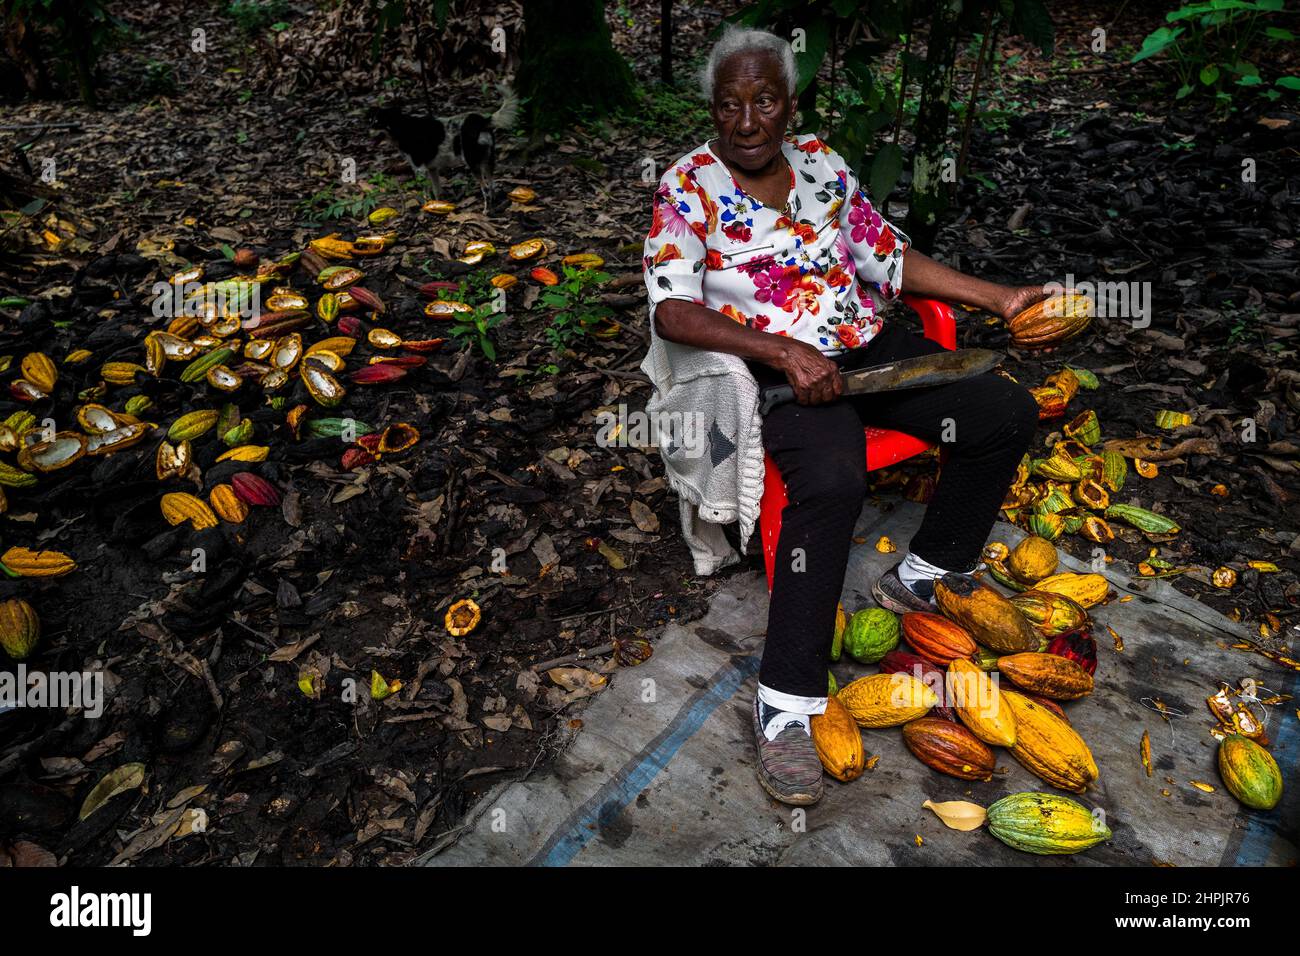 Betsabeth Alvarez, a 98-years-old Afro-Colombian farmer, takes a break during a harvest on a traditional cacao farm in Cuernavaca, Cauca, Colombia. Stock Photo